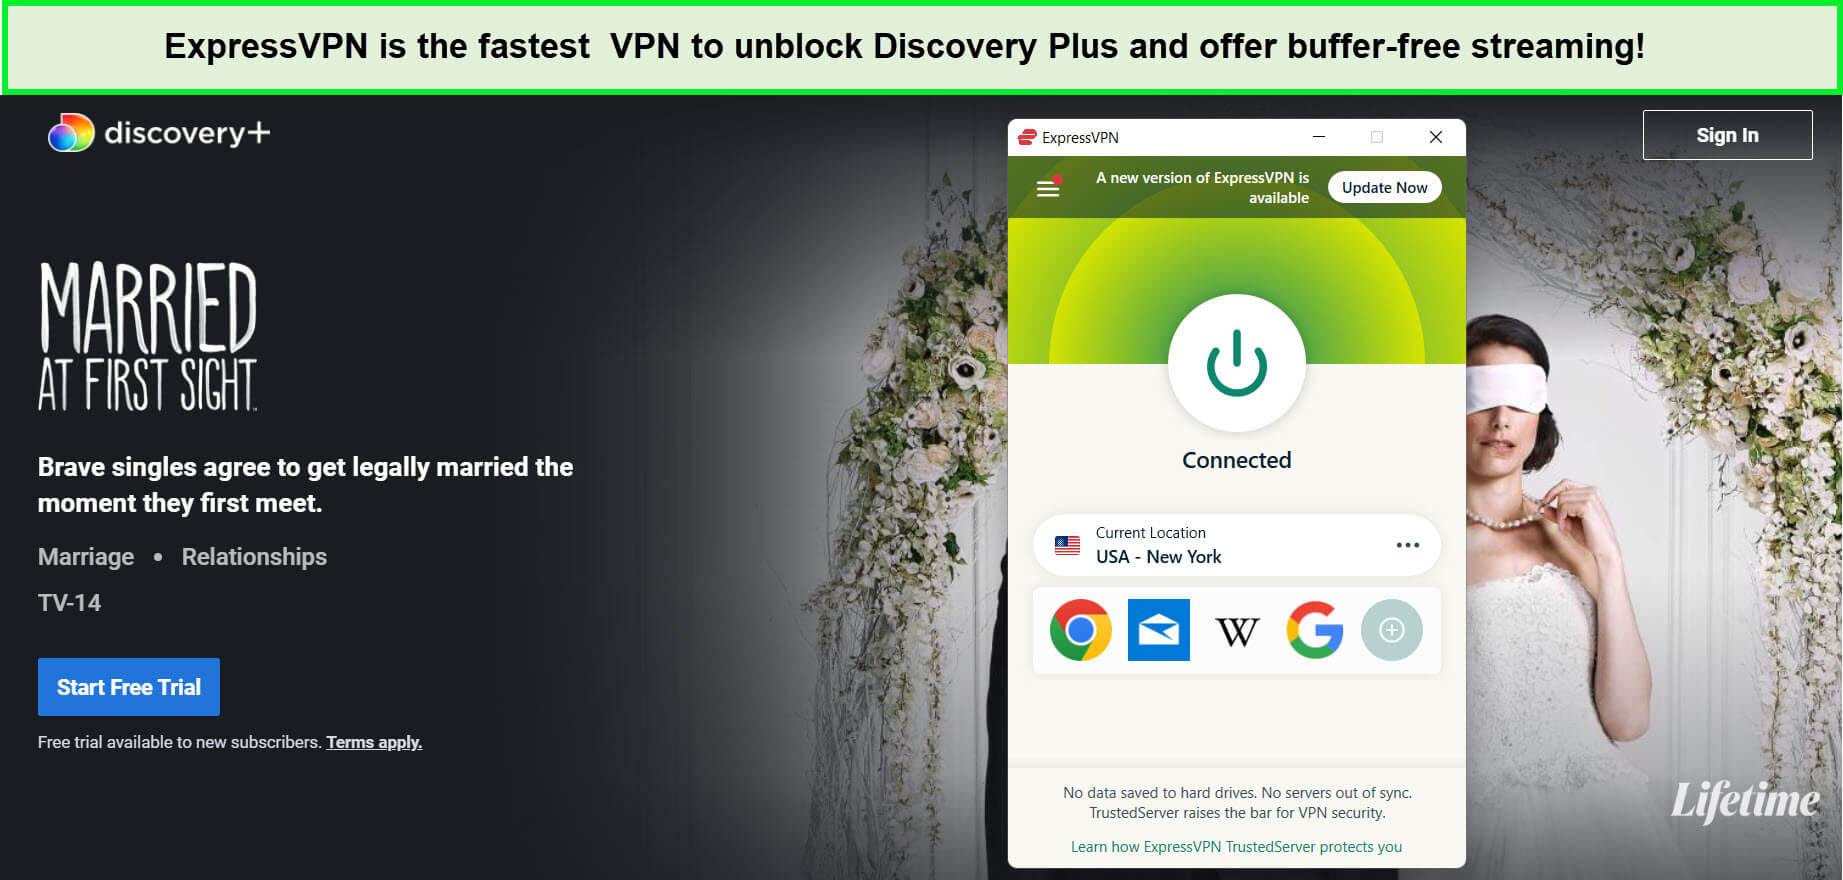 expressvpn-unblocks-married-at-first-sight-journey-so-far-nashville-on-discovery-plus-in-uk